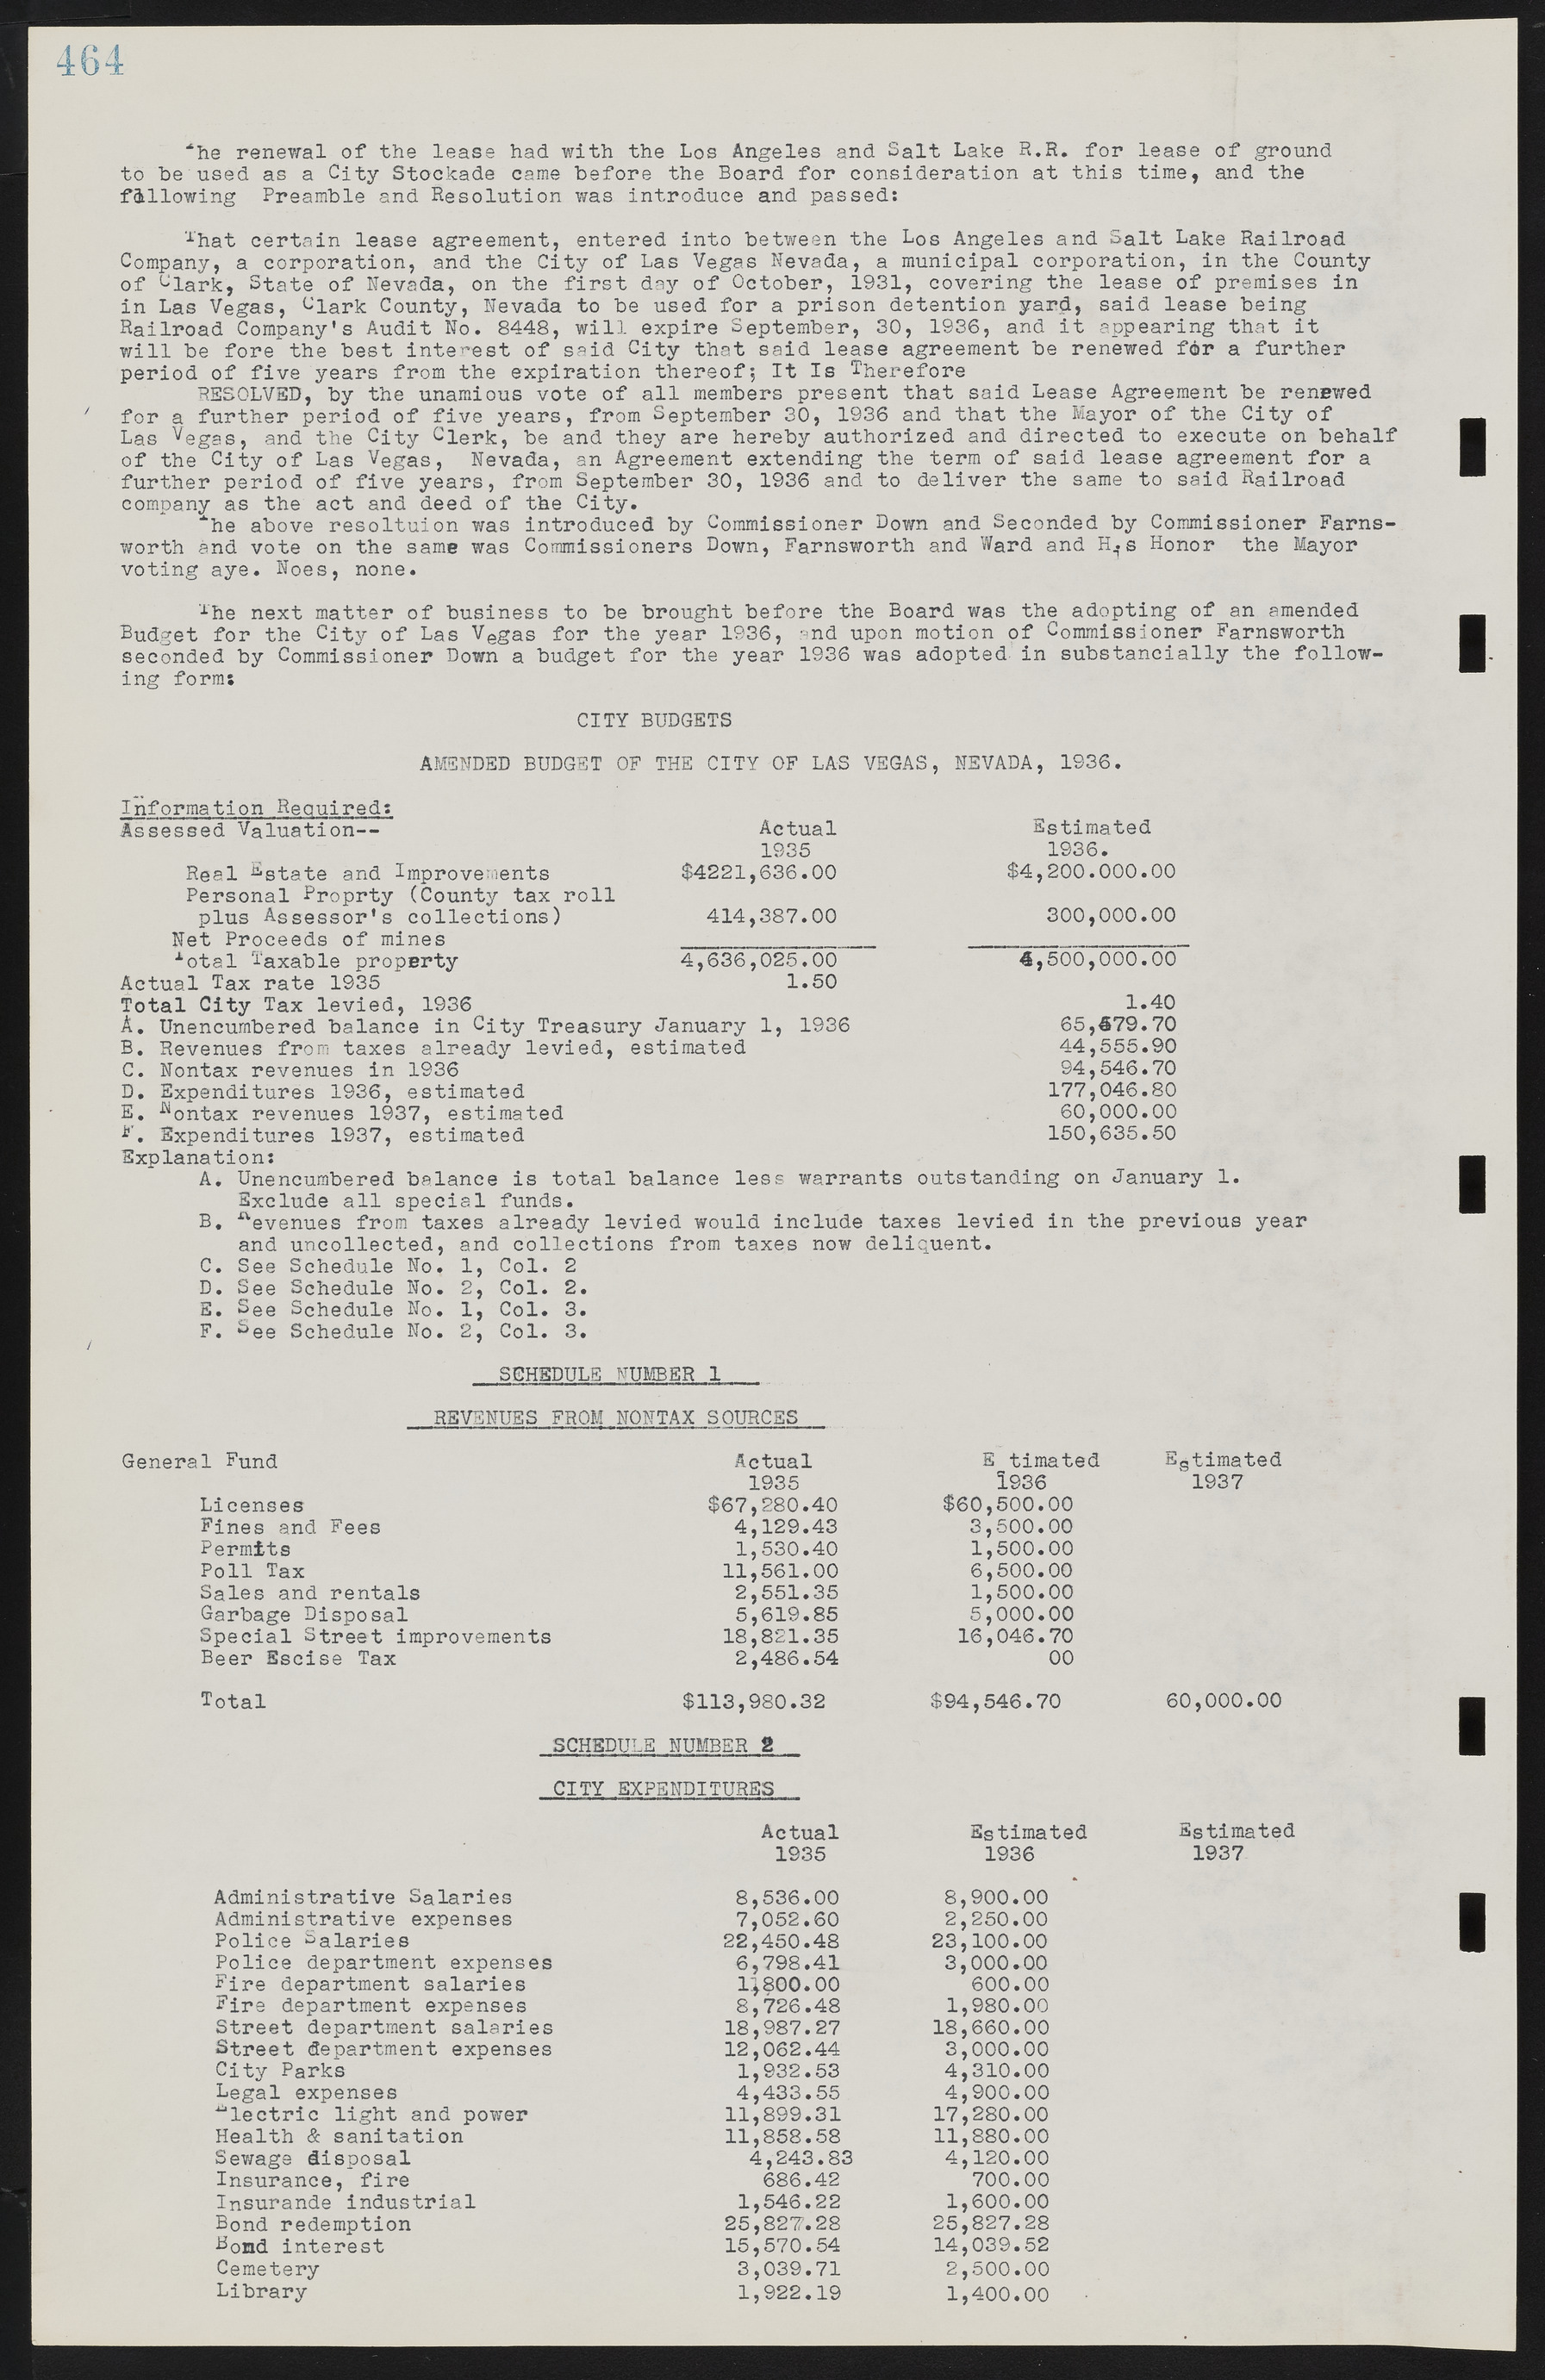 Las Vegas City Commission Minutes, May 14, 1929 to February 11, 1937, lvc000003-471